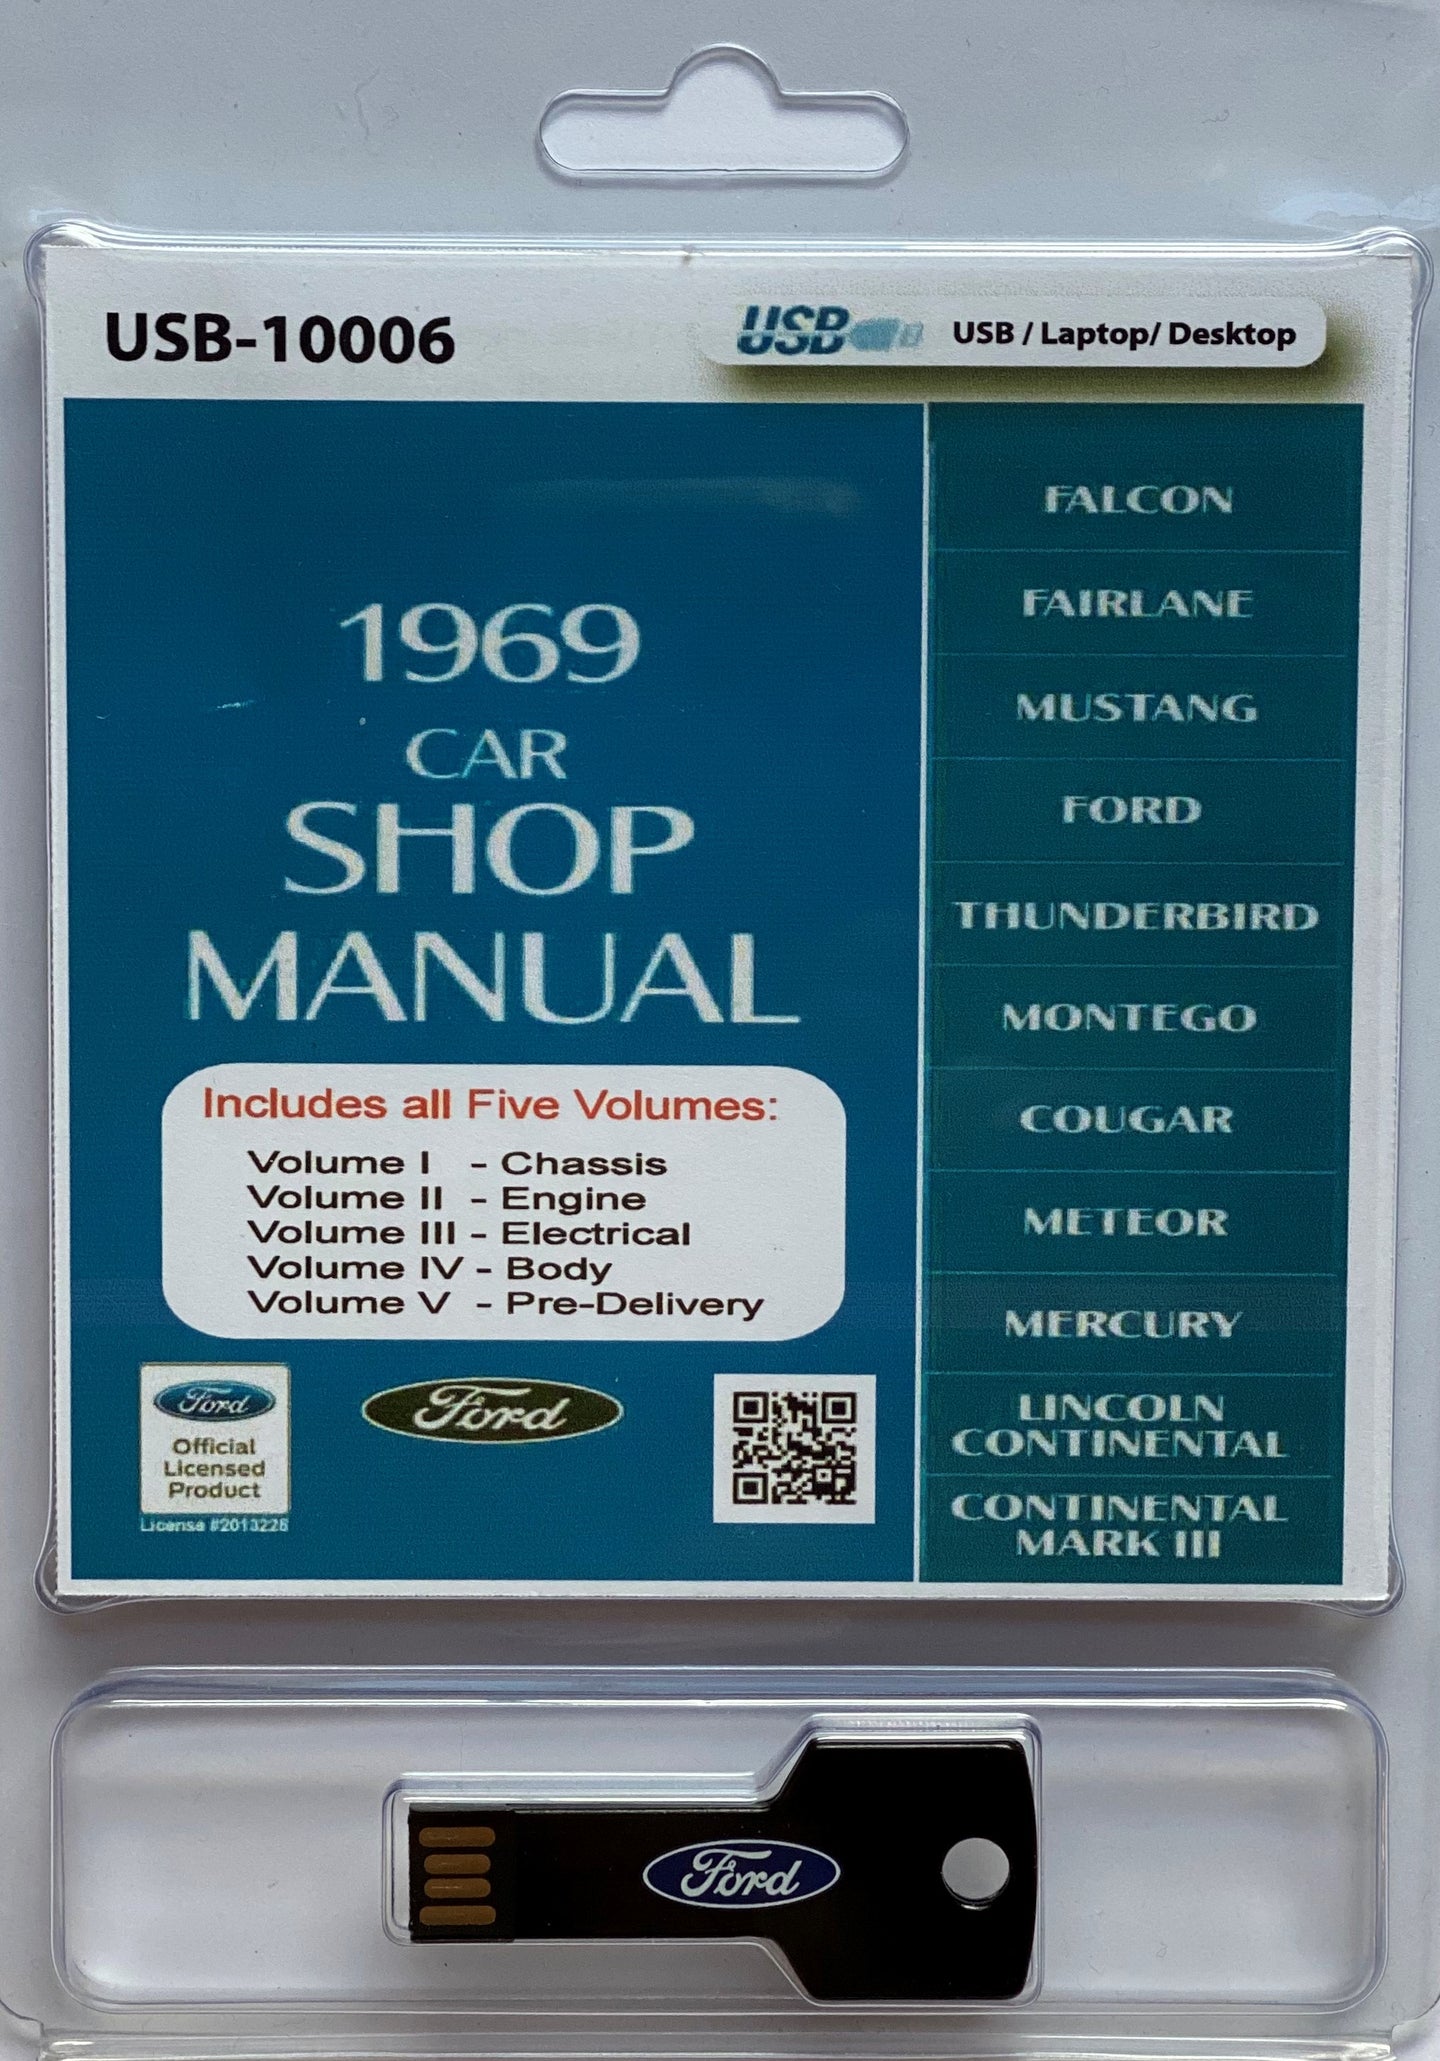 1969 Mustang, Falcon, Fairlane, Cougar, and other Ford Cars Shop Manual On USB Drive